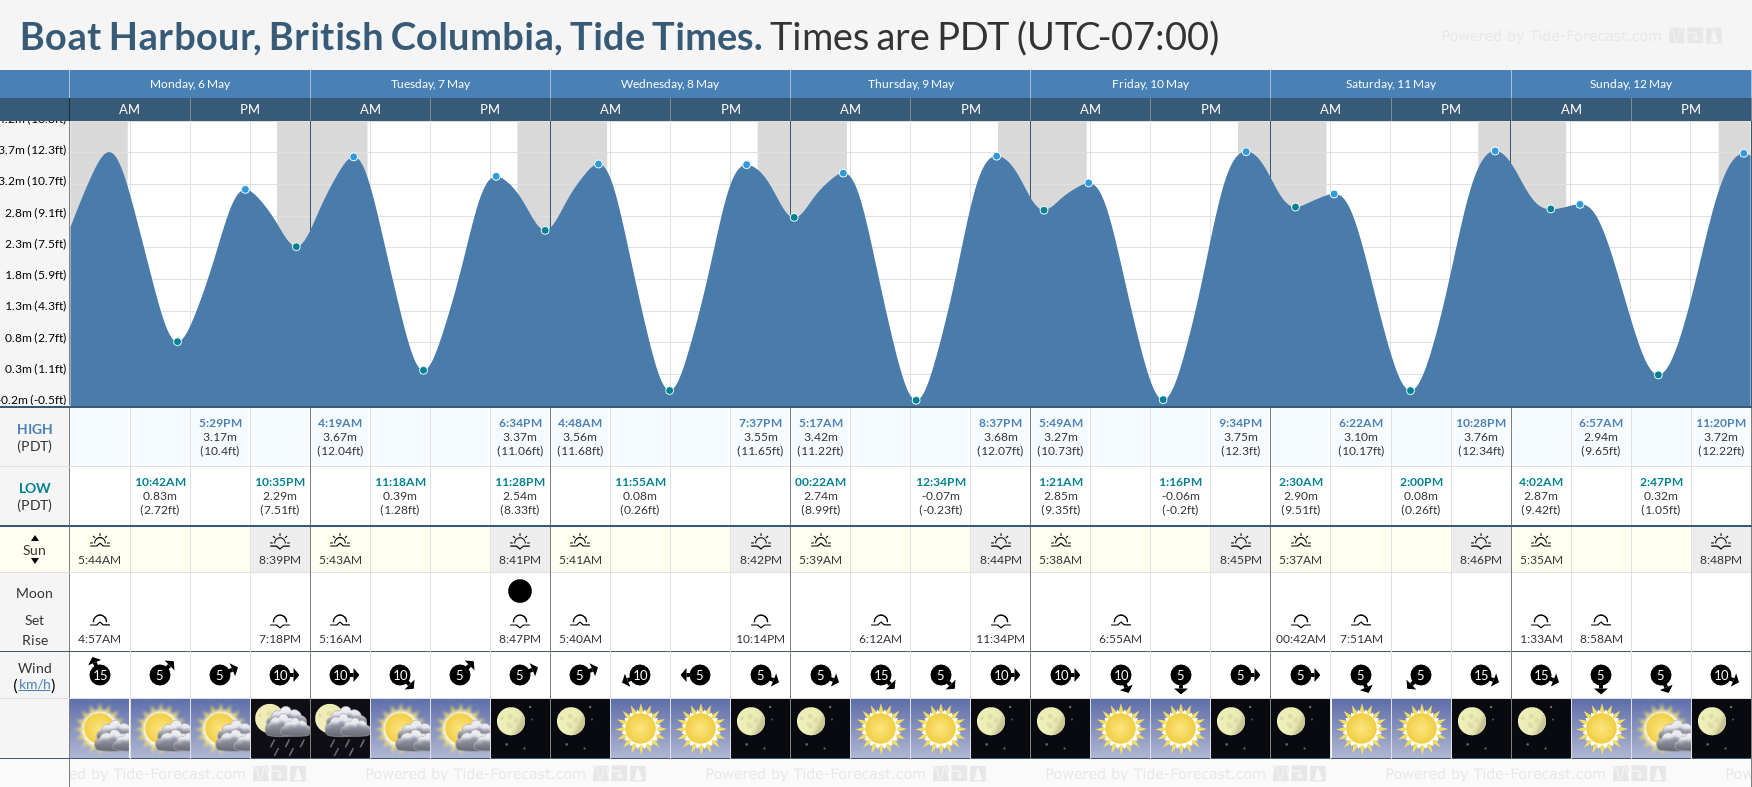 Boat Harbour, British Columbia Tide Chart including high and low tide tide times for the next 7 days